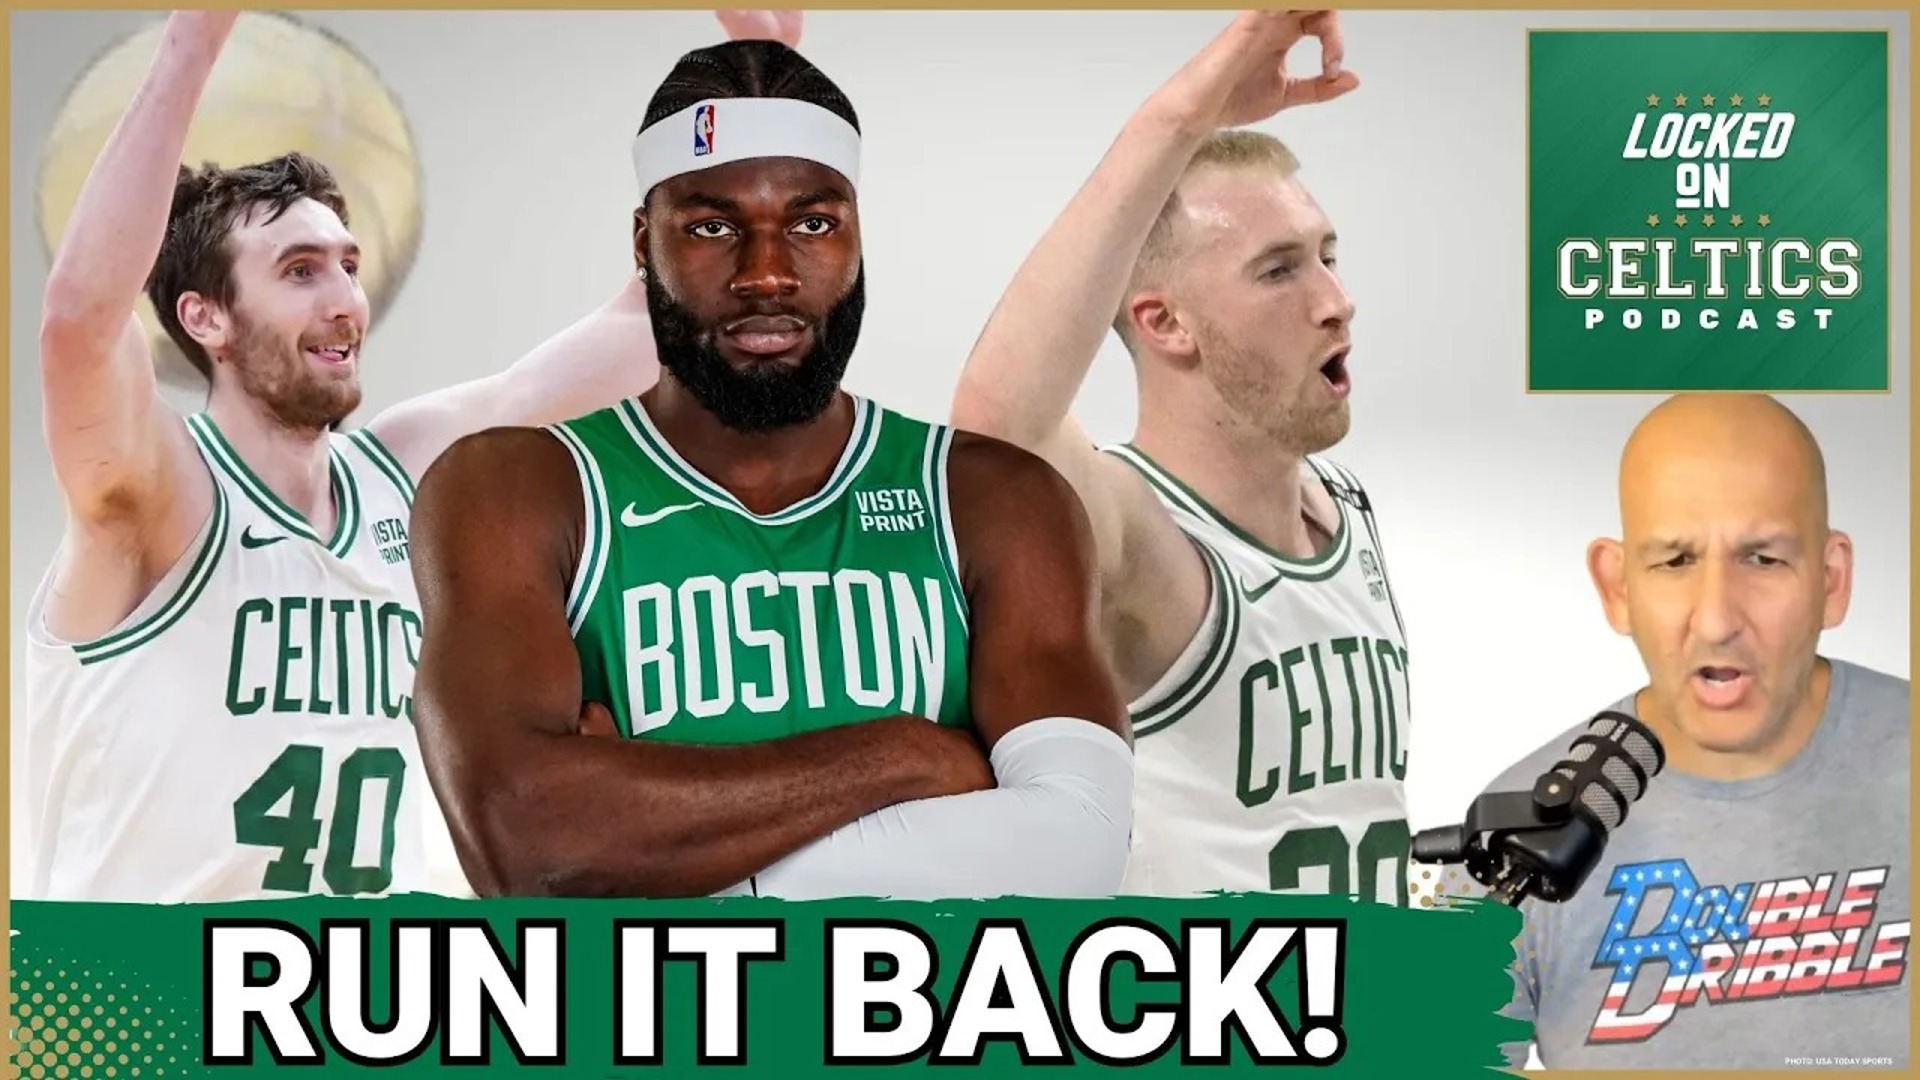 The Celtics opened free agency by bringing back Sam Hauser, Luke Kornet, and Neemias Queta, meaning 12 of Boston's championship players are back for next season.